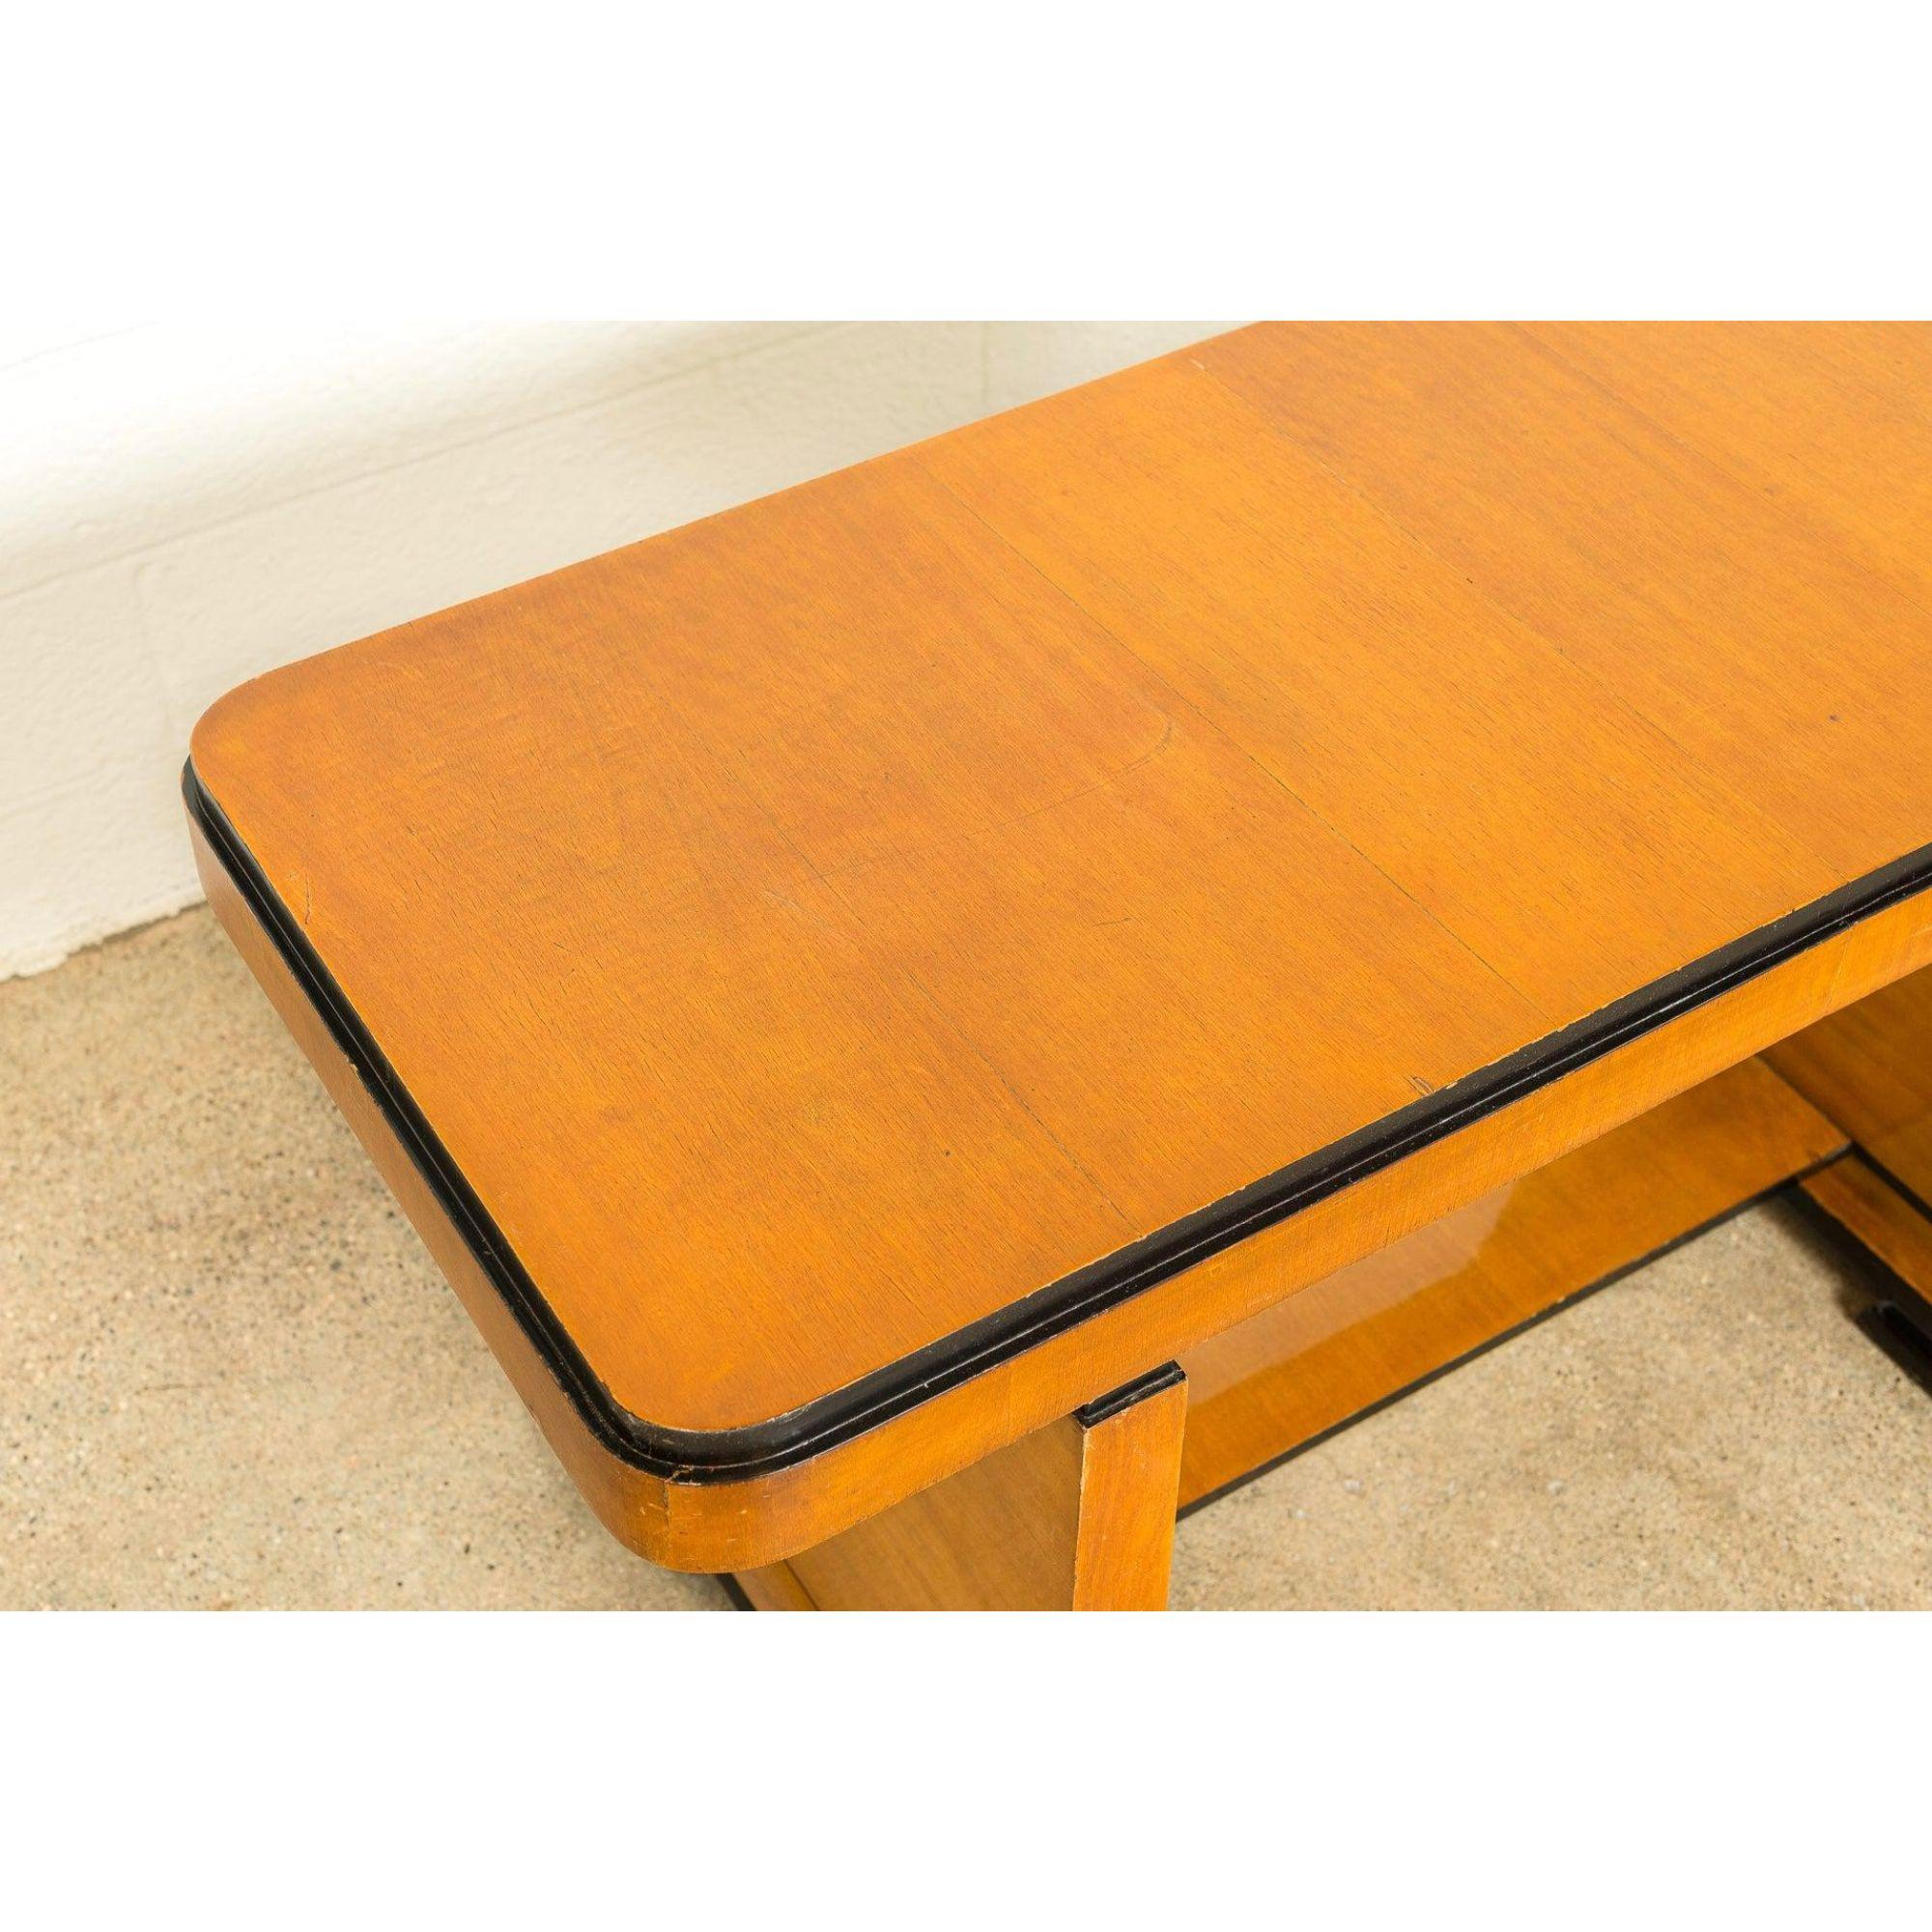 Art Deco Table or Writing Desk in Maple Wood with Ebonized Accents, circa 1930 For Sale 2